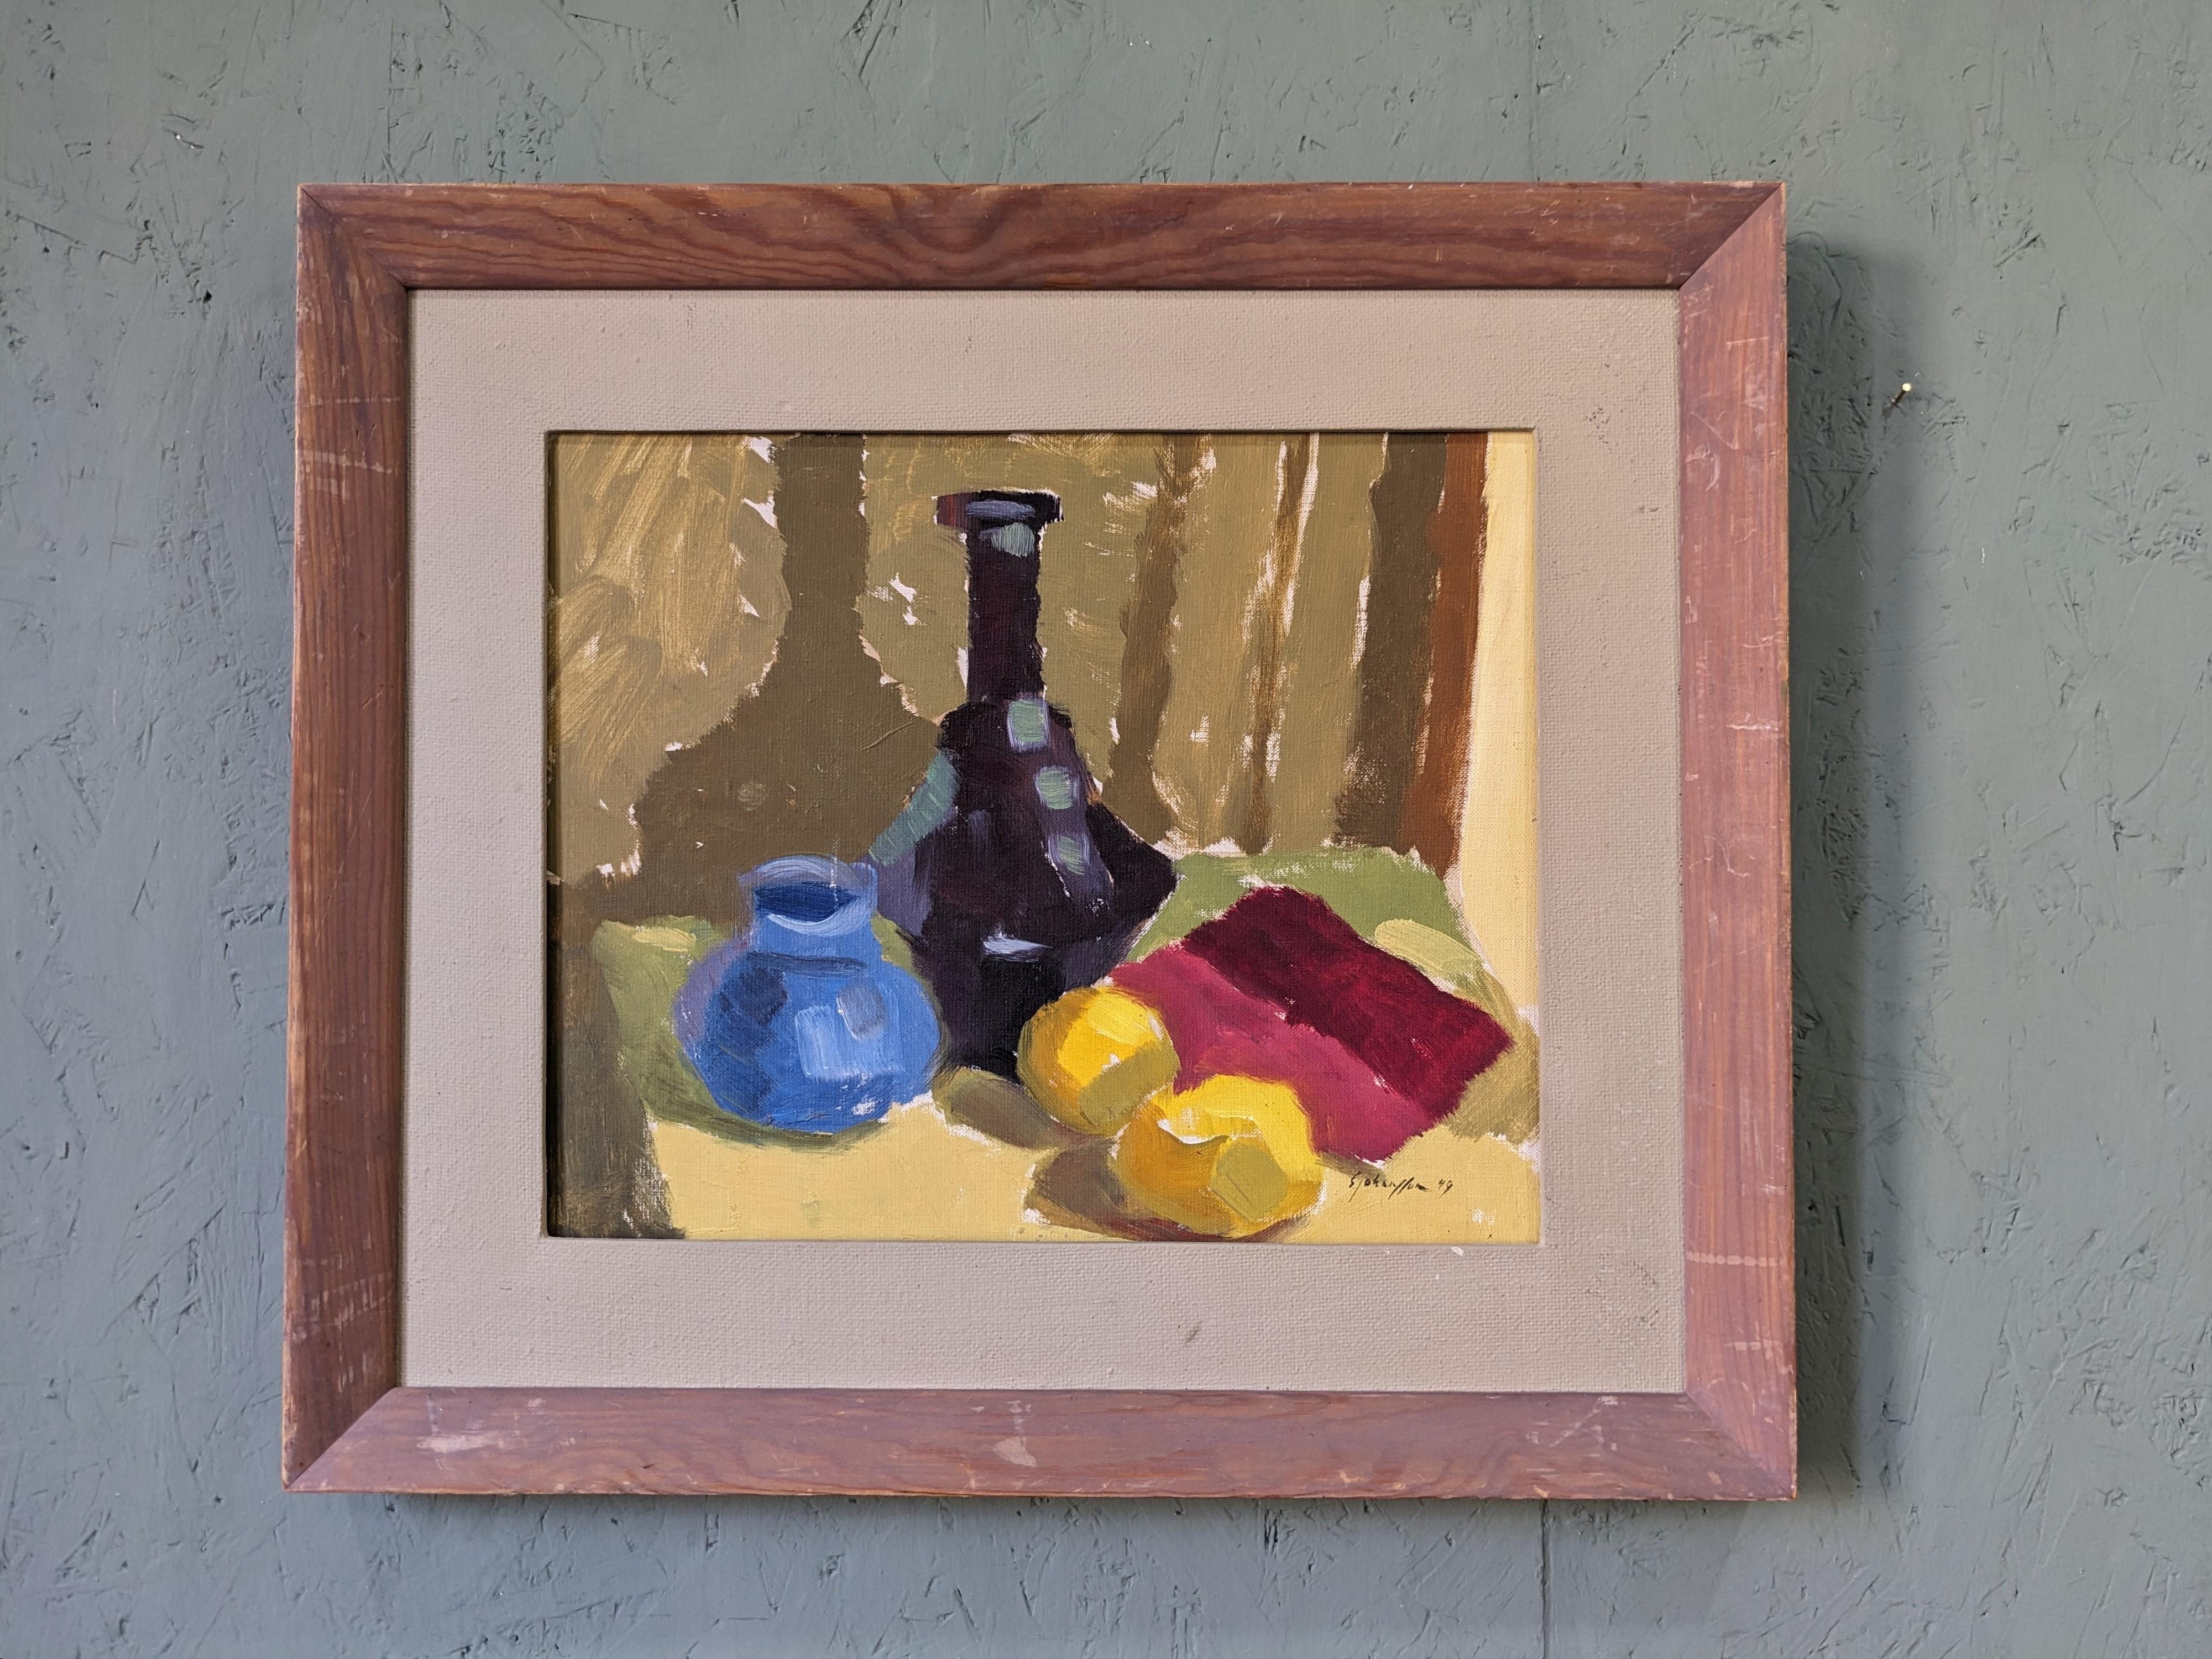 LEMONS & POTS
Oil on Board
Size: 48.5 x 55.5 cm (including frame)

A visually striking and expressive modernist still life composition, executed in oil onto board and dated 1949.

The painting presents a group of objects including 2 lemons, 2 pots